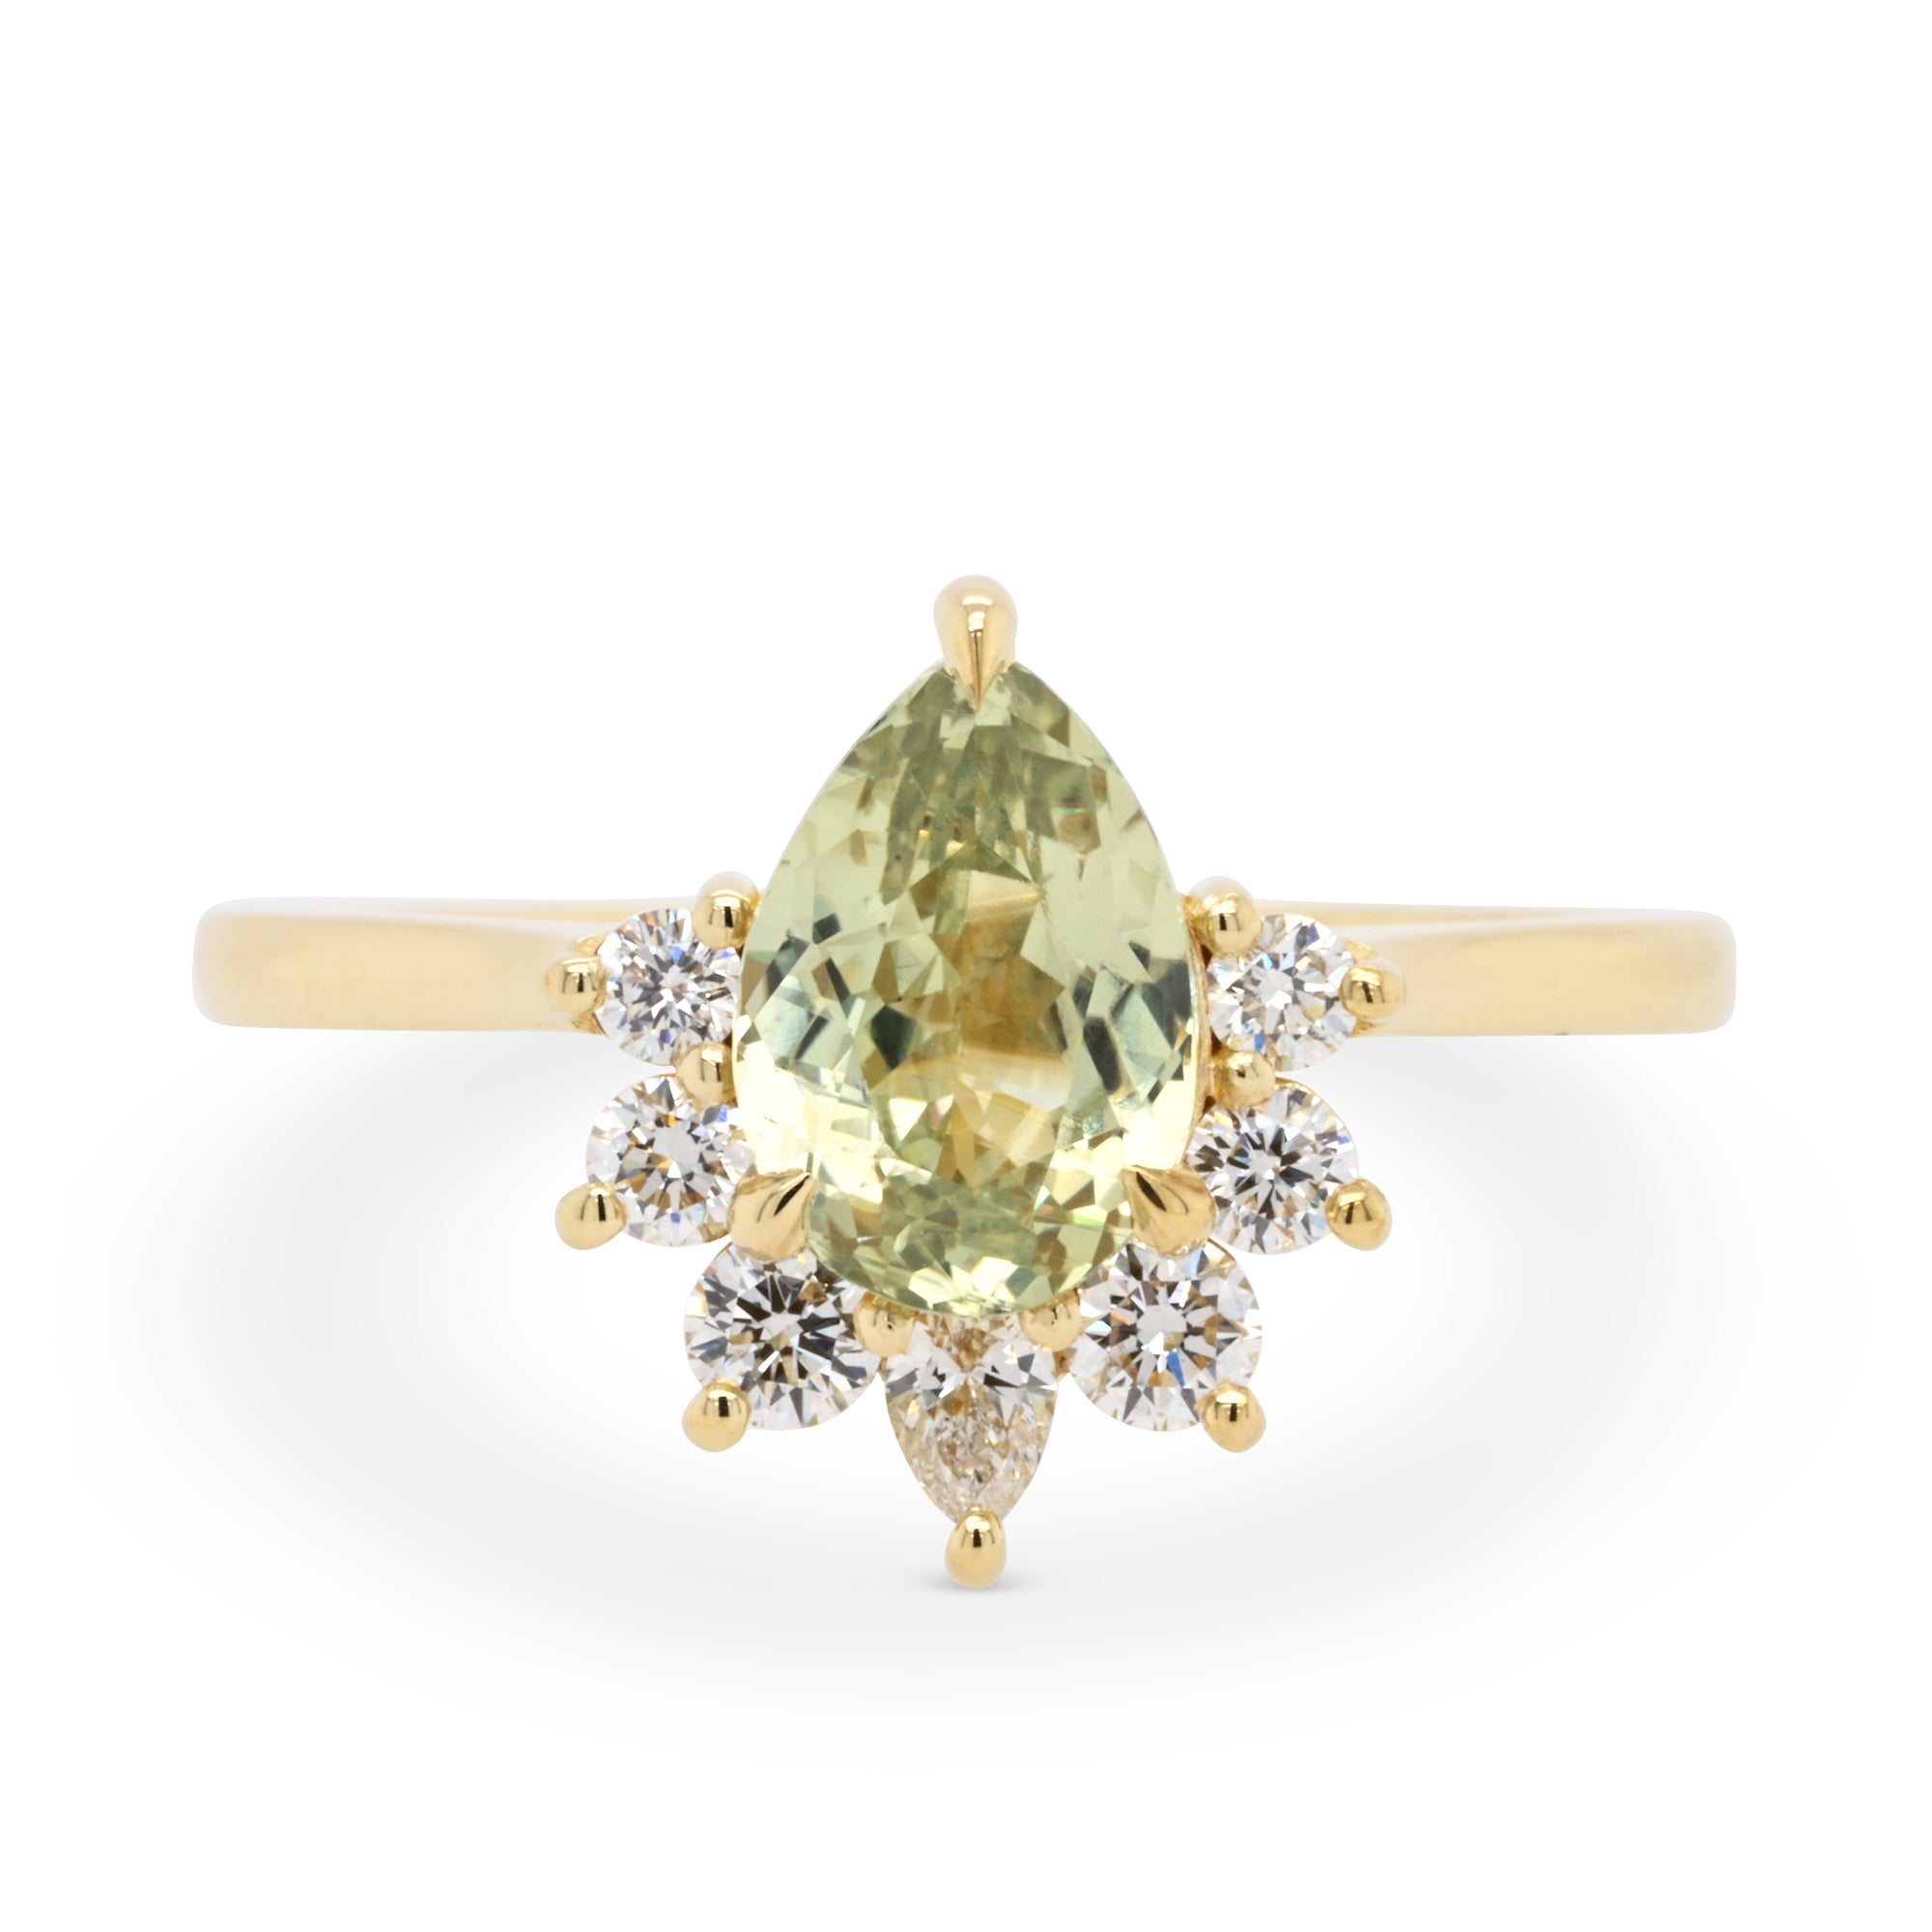 Light green pear shaped sapphire engagement ring with a 14k yellow gold diamond half halo setting